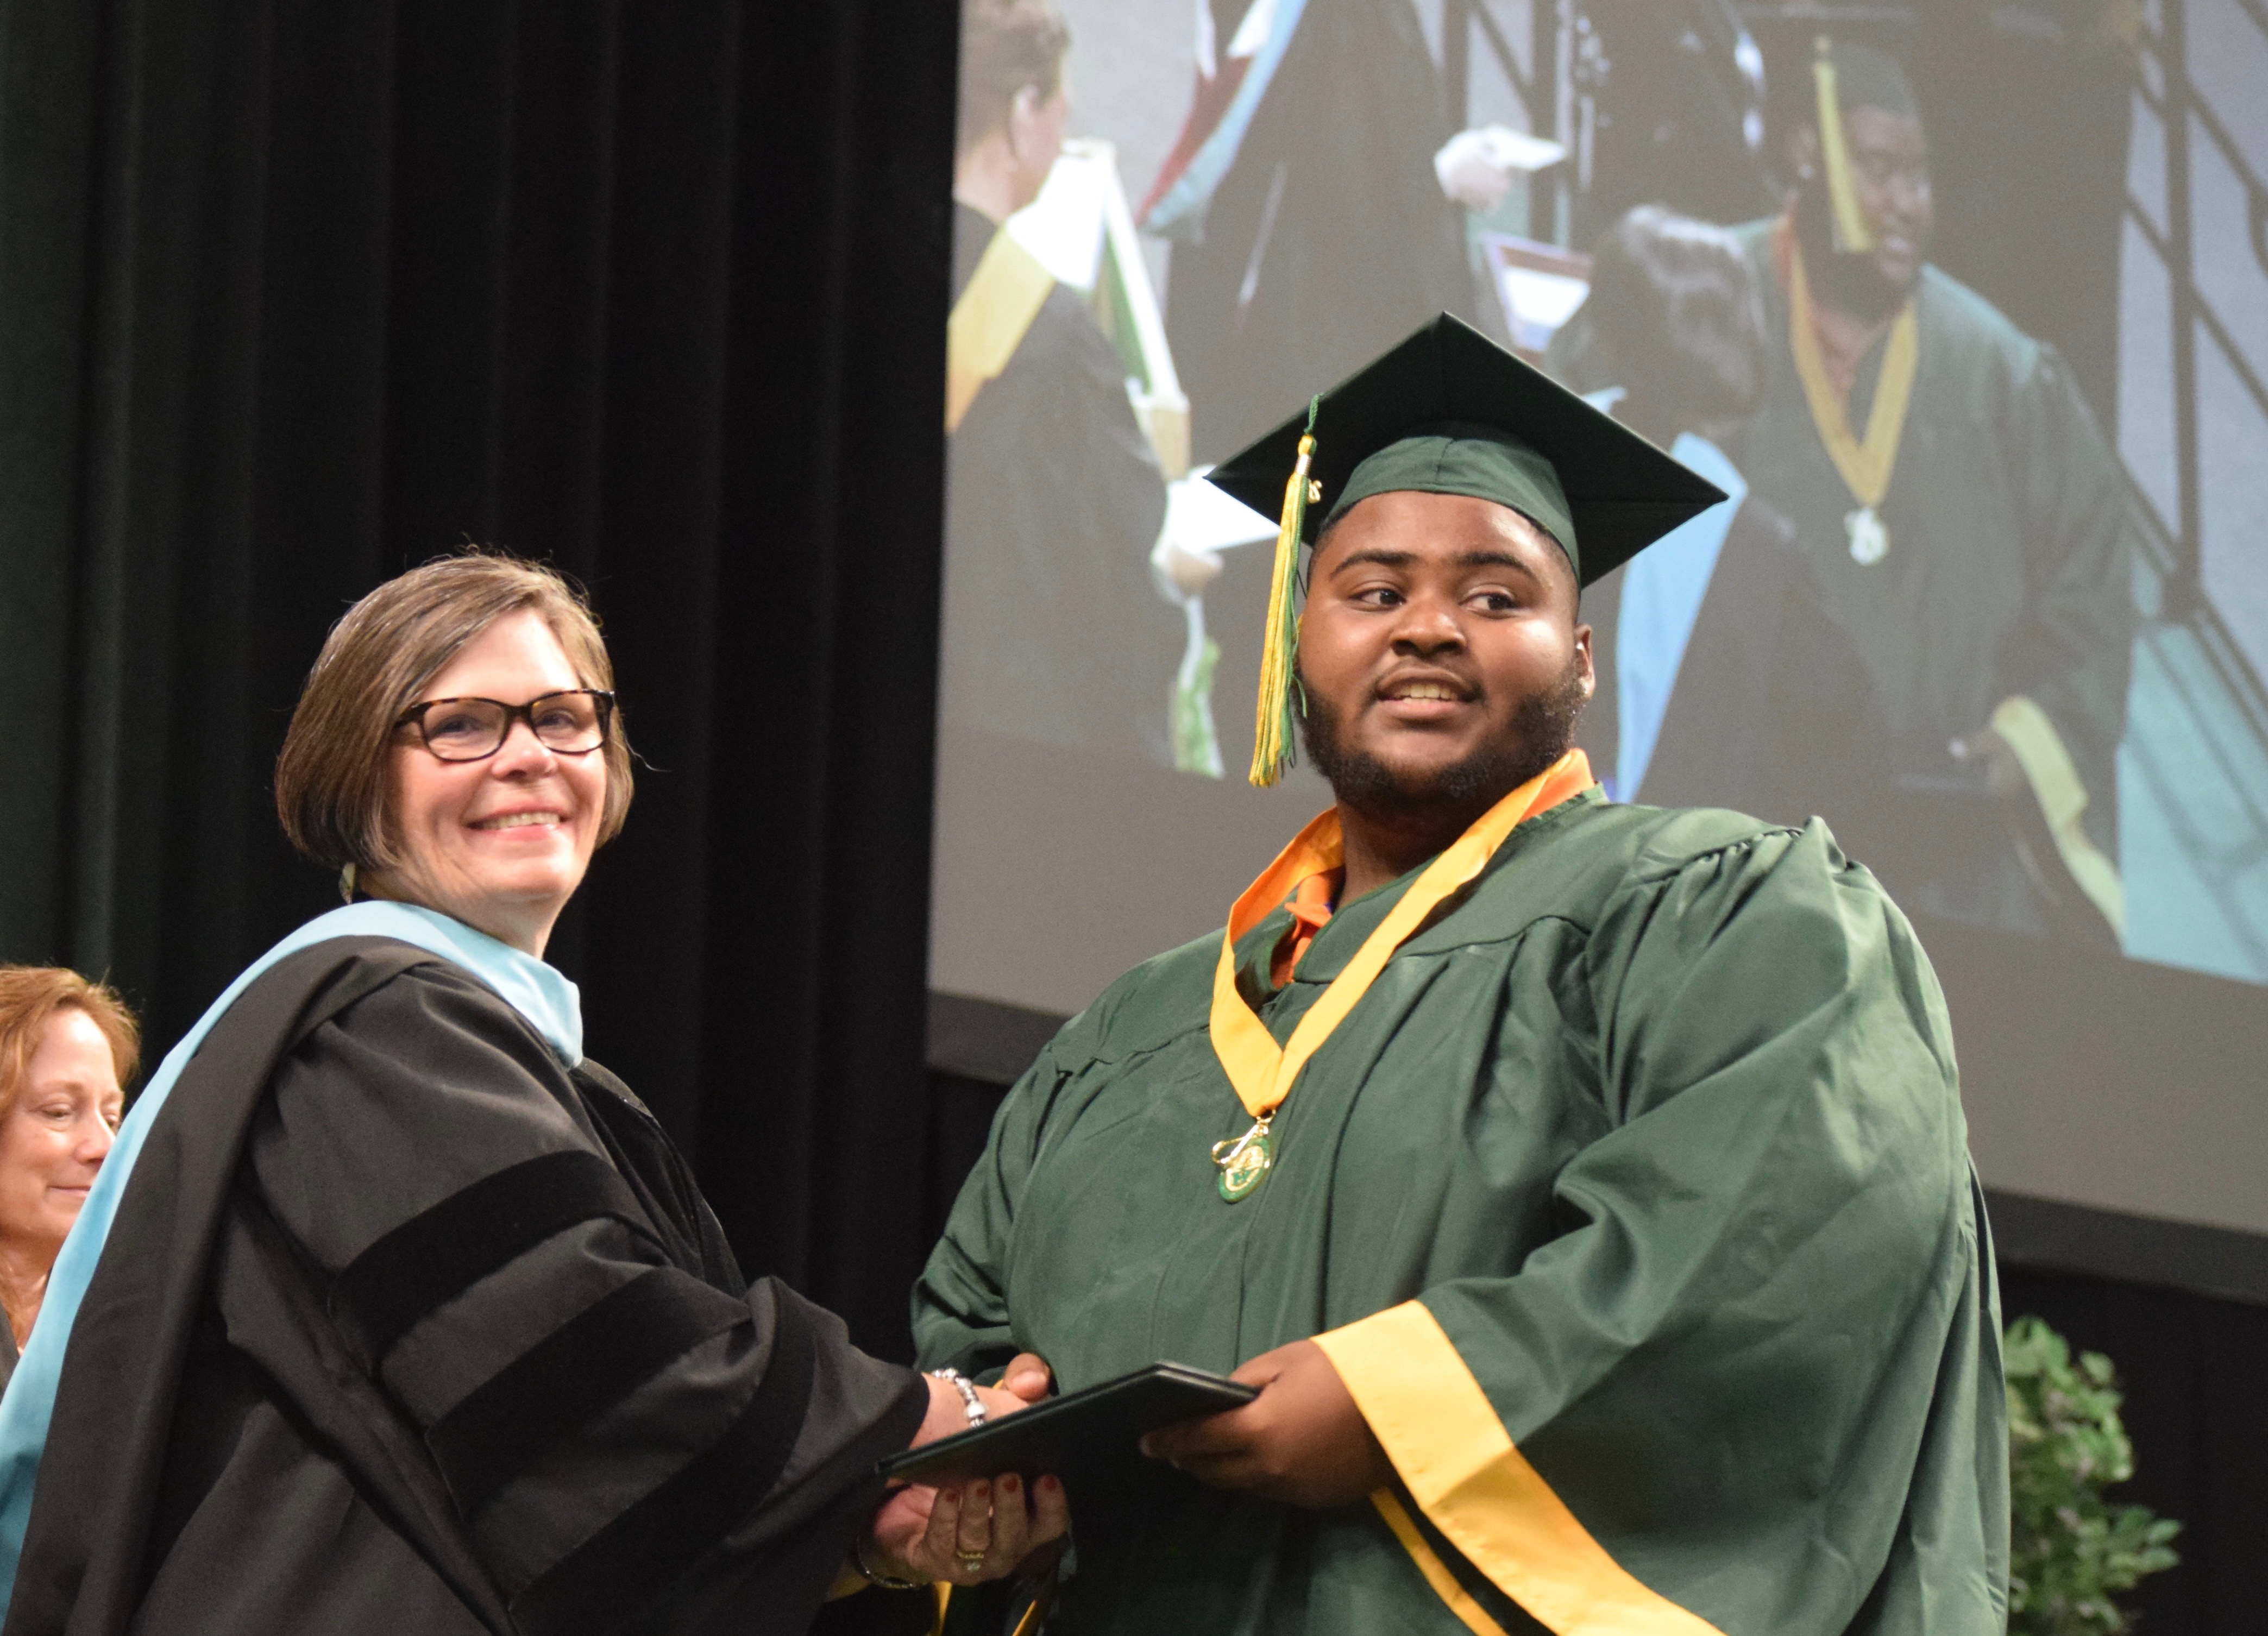 An African-American graduate and Principal Janet Schwamb smile as she hands him his diploma